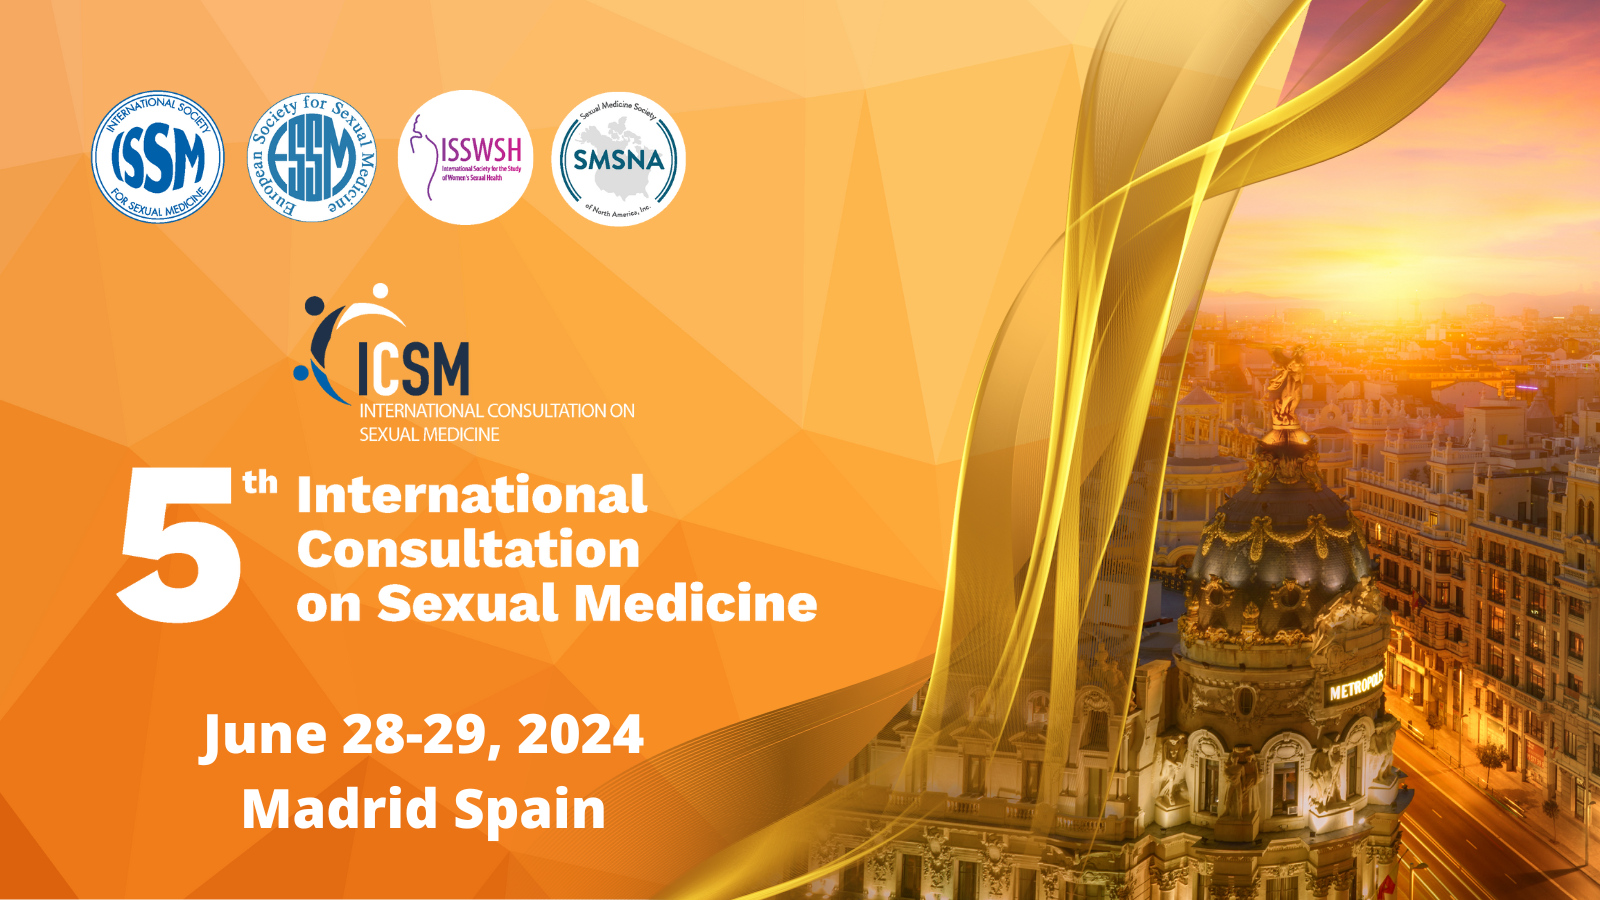 SMSNA Joins Joint Program at 5th International Consultation on Sexual Medicine